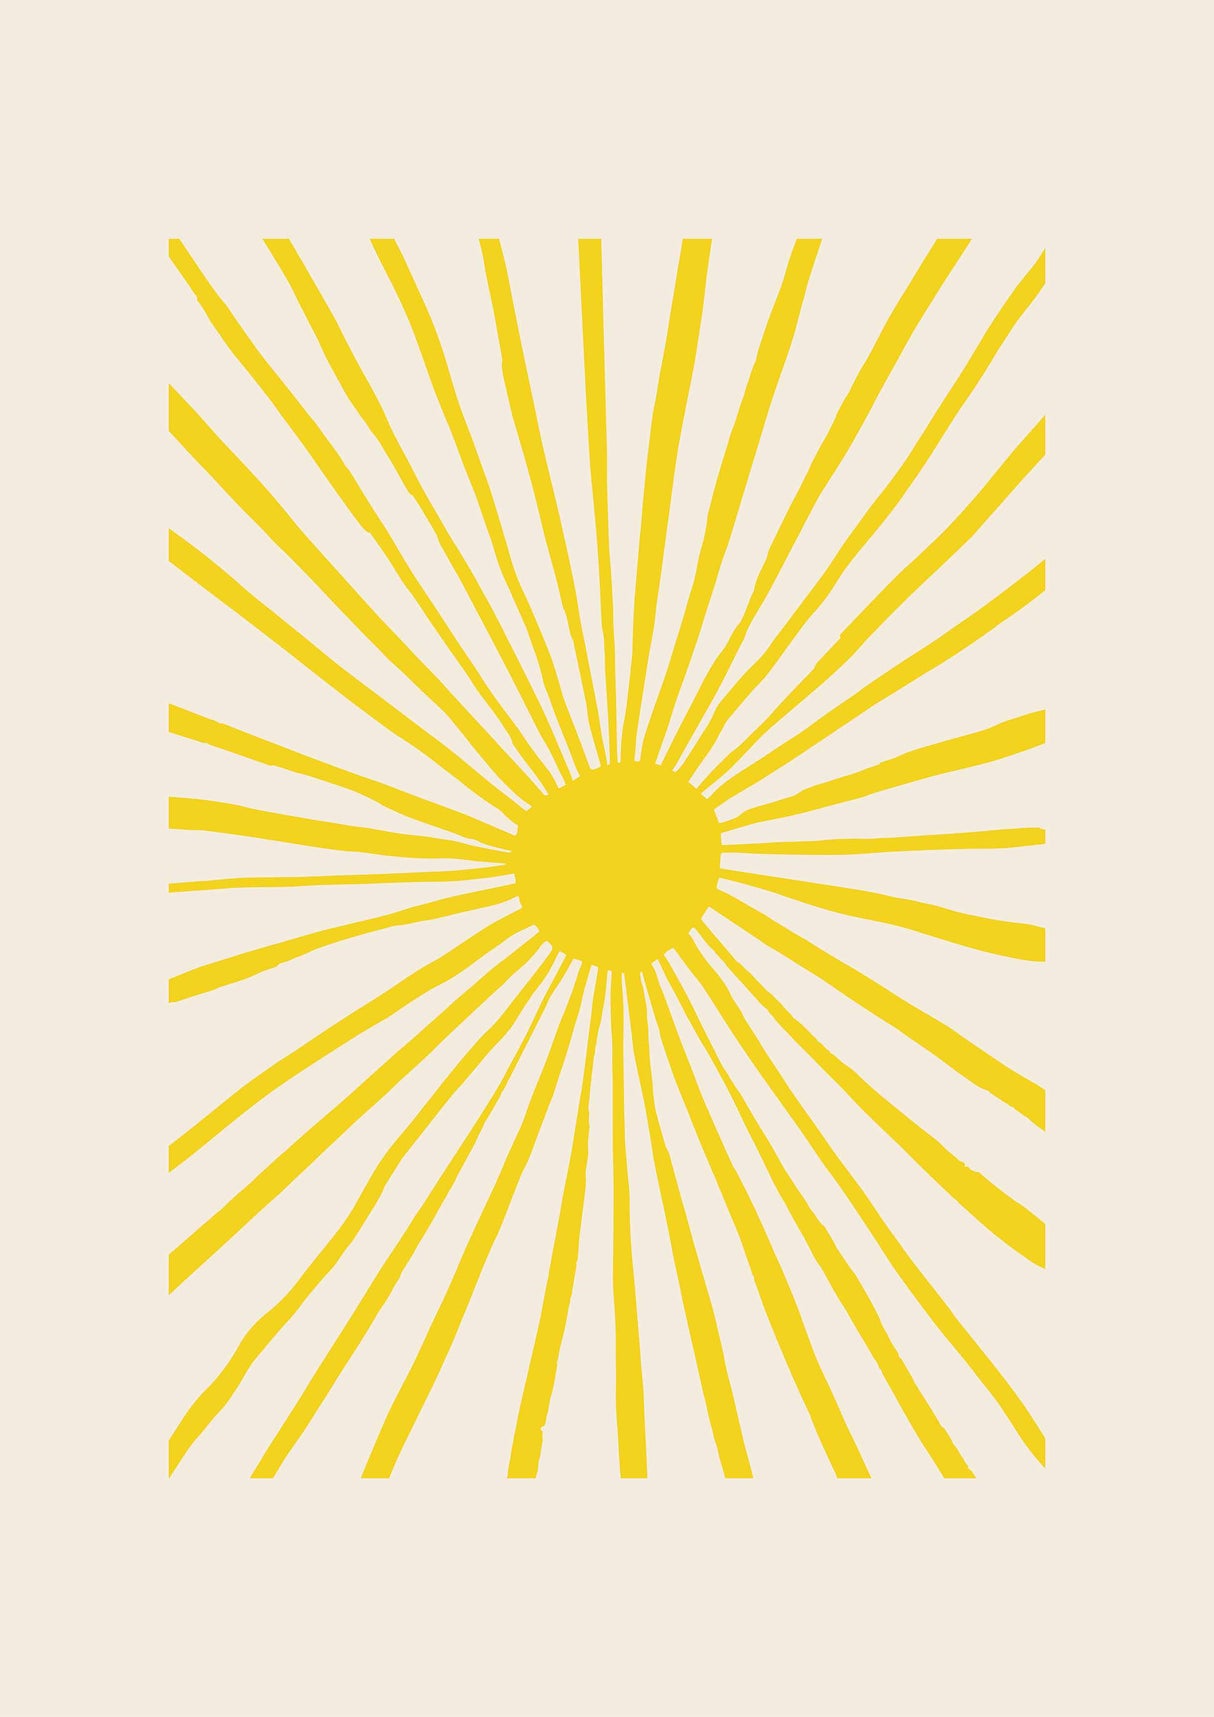 The Sun poster